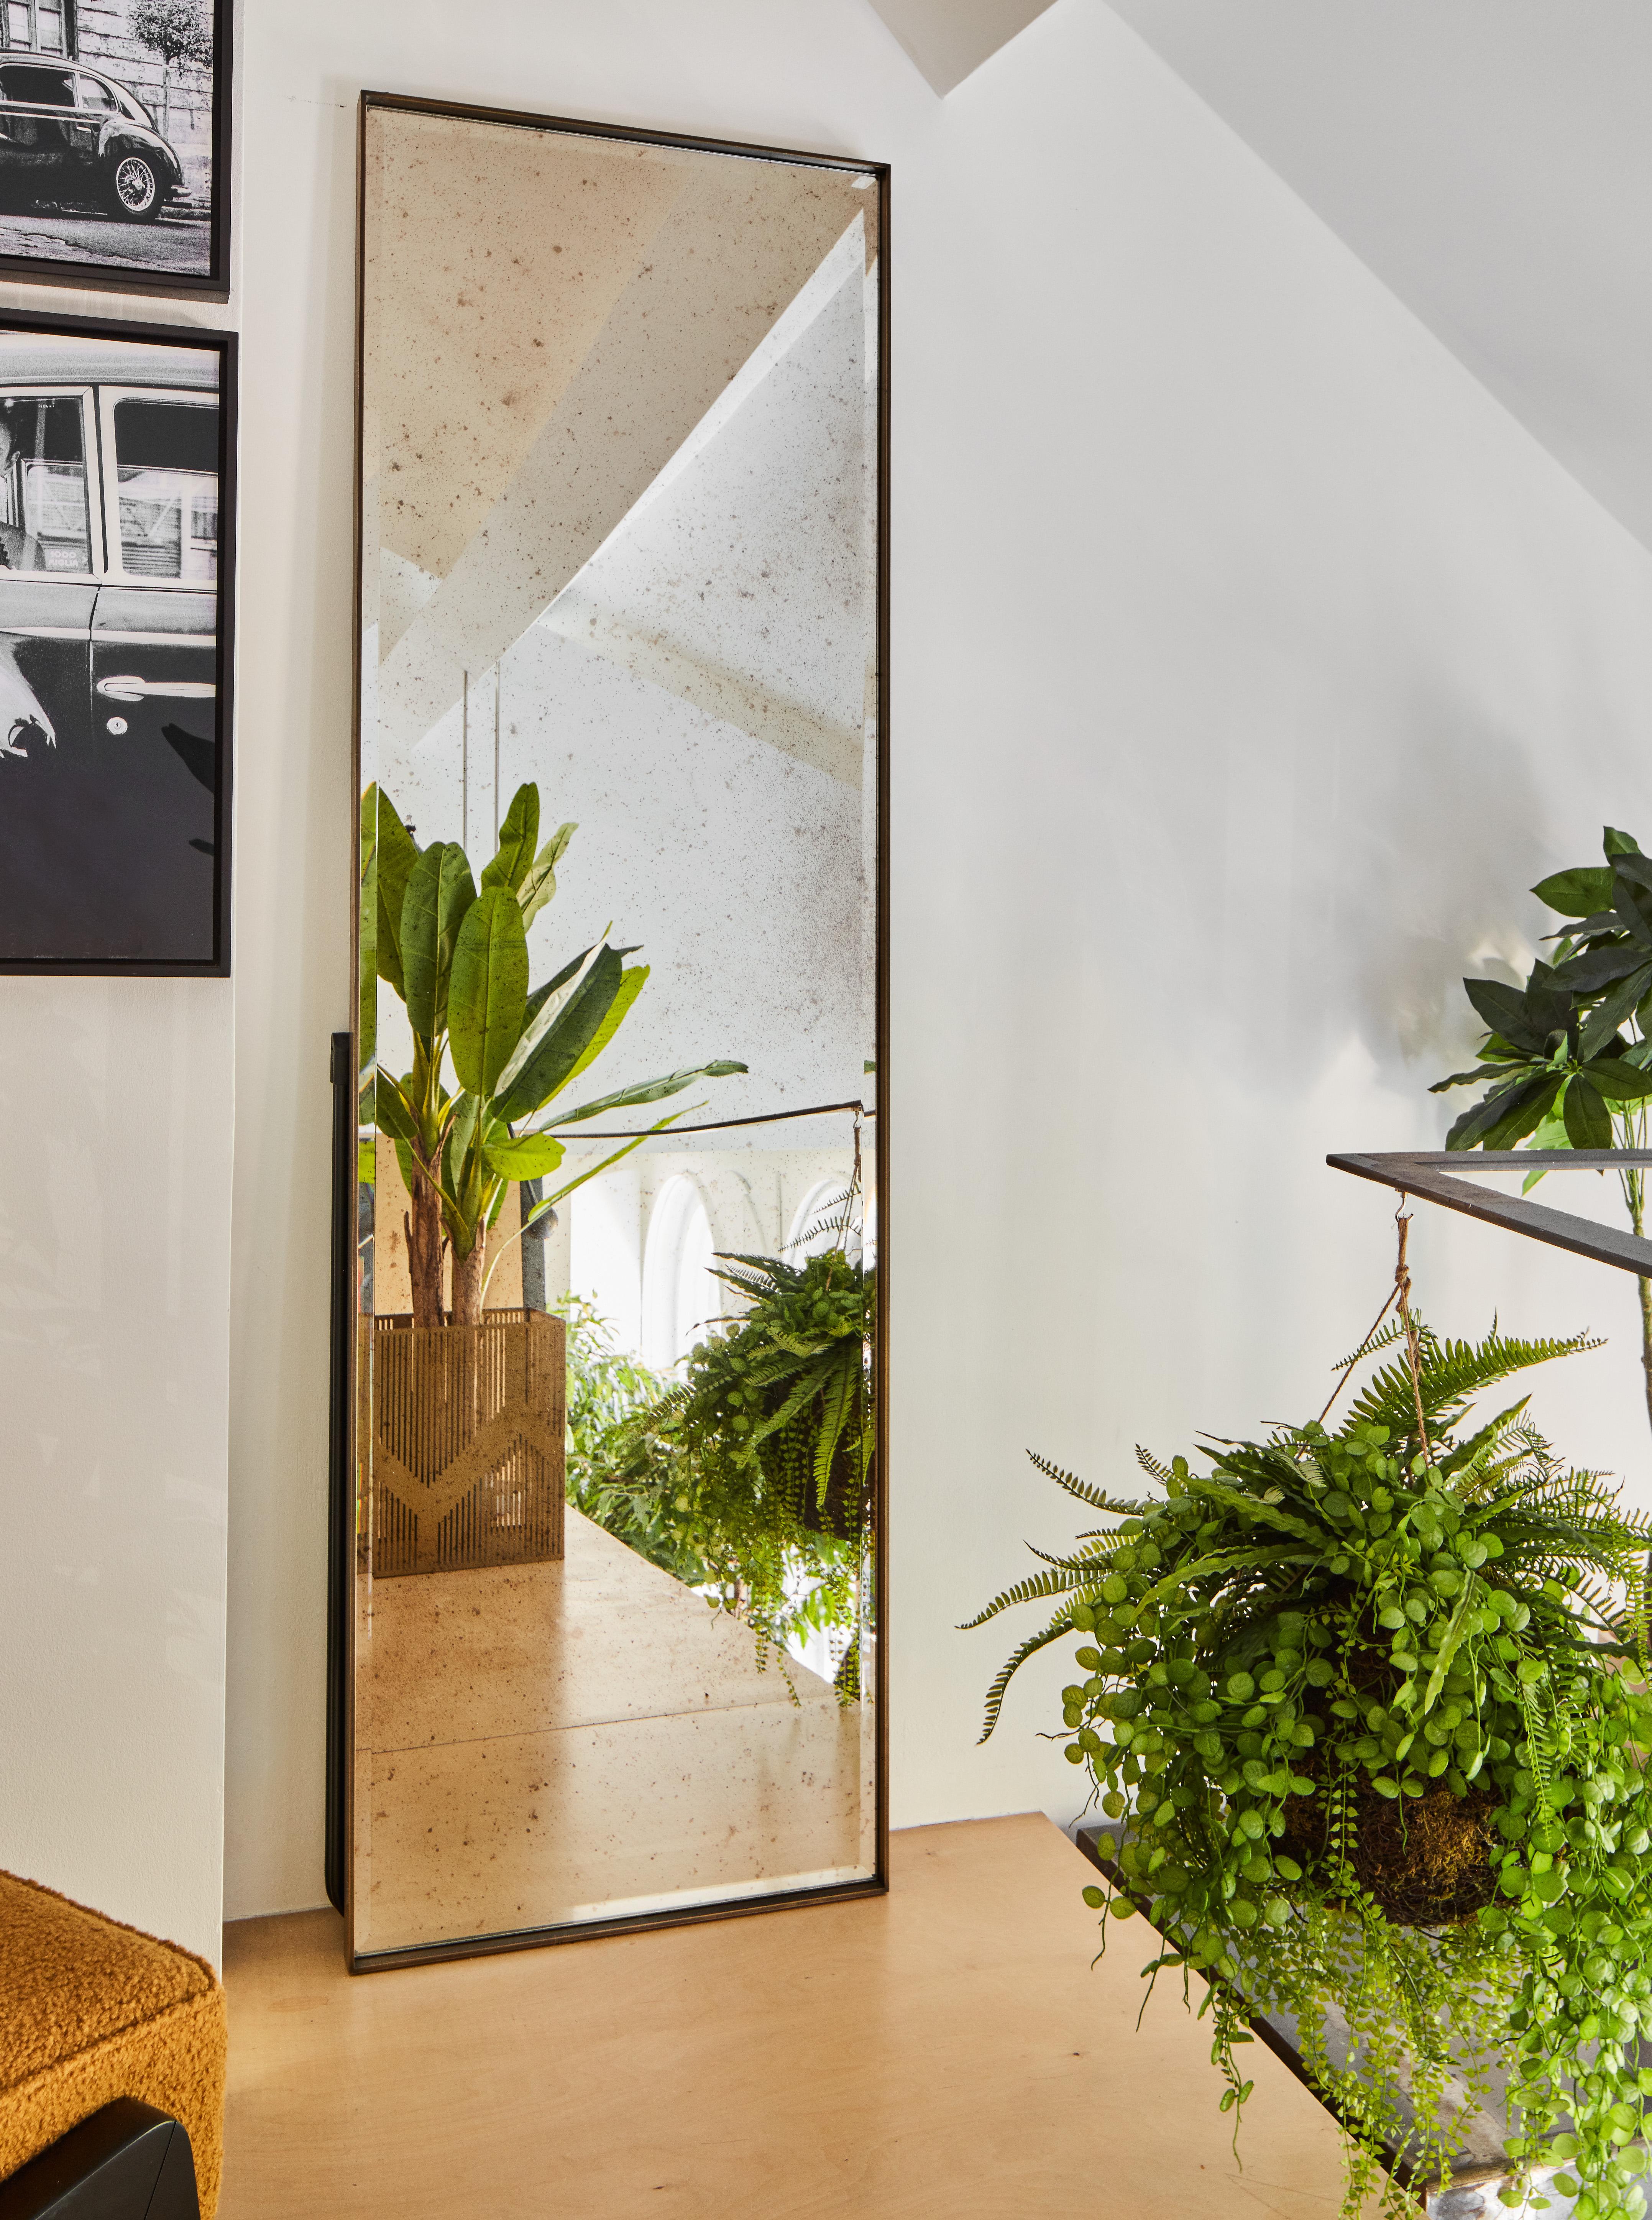 Introducing the Slim Mirror by Casa Botelho - a luxurious and masculine piece of home decor that is designed to make a bold statement. Standing tall at 210 cm height, this mirror features an exaggerated frame that adds a touch of drama and